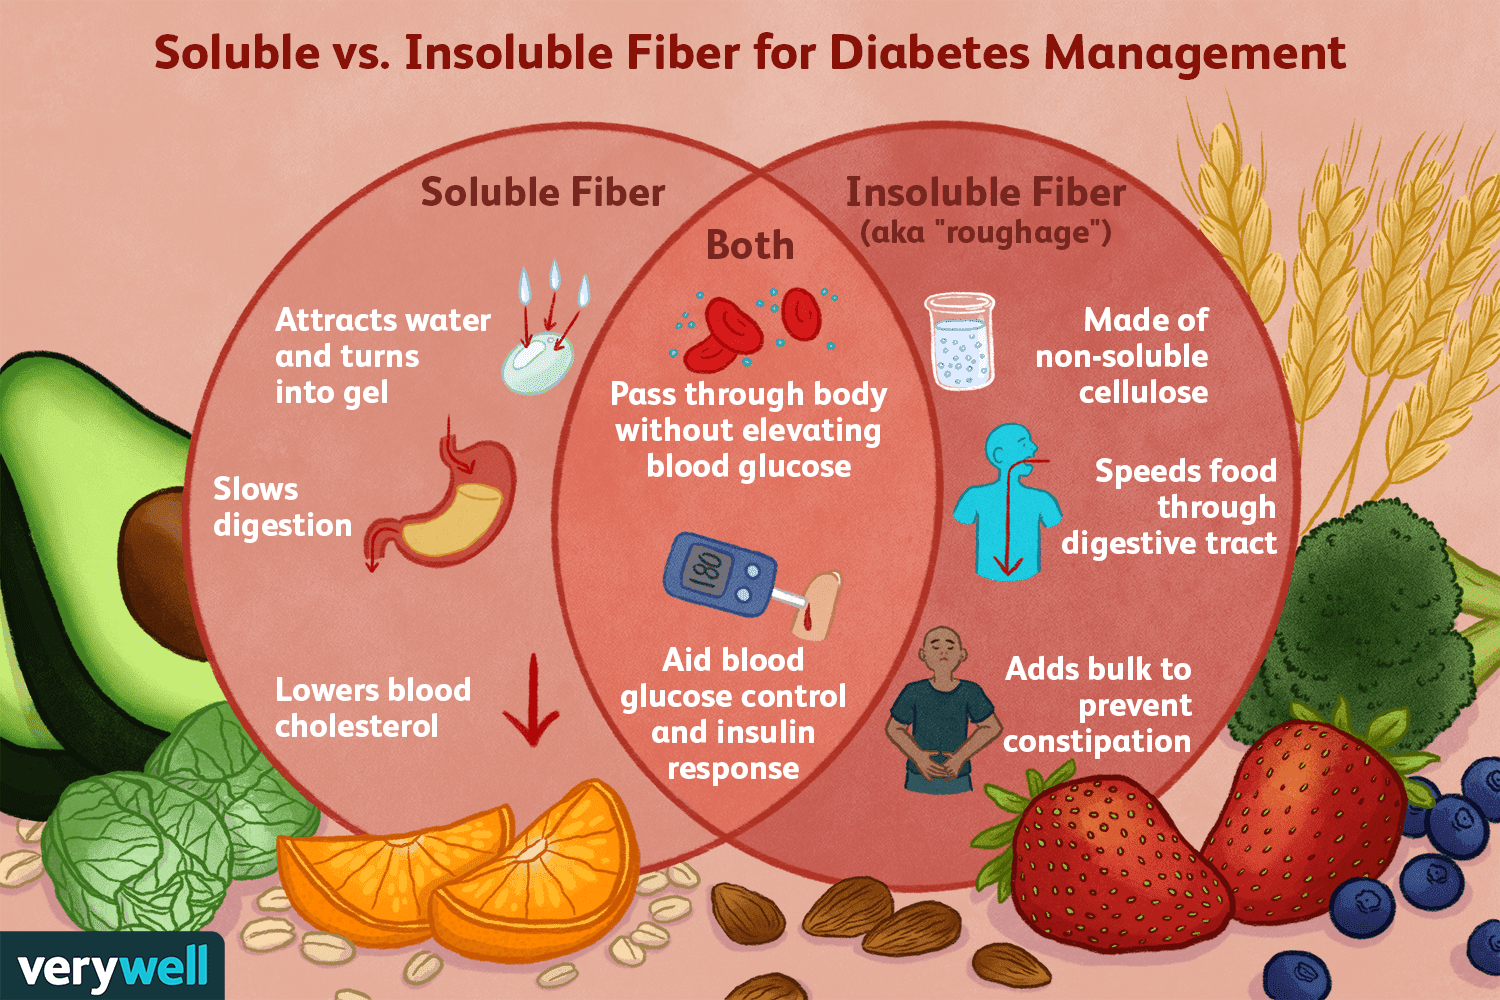 soluble-and-insoluble-fiber-1087462-21c72678948c413183c75d95374b9342.png